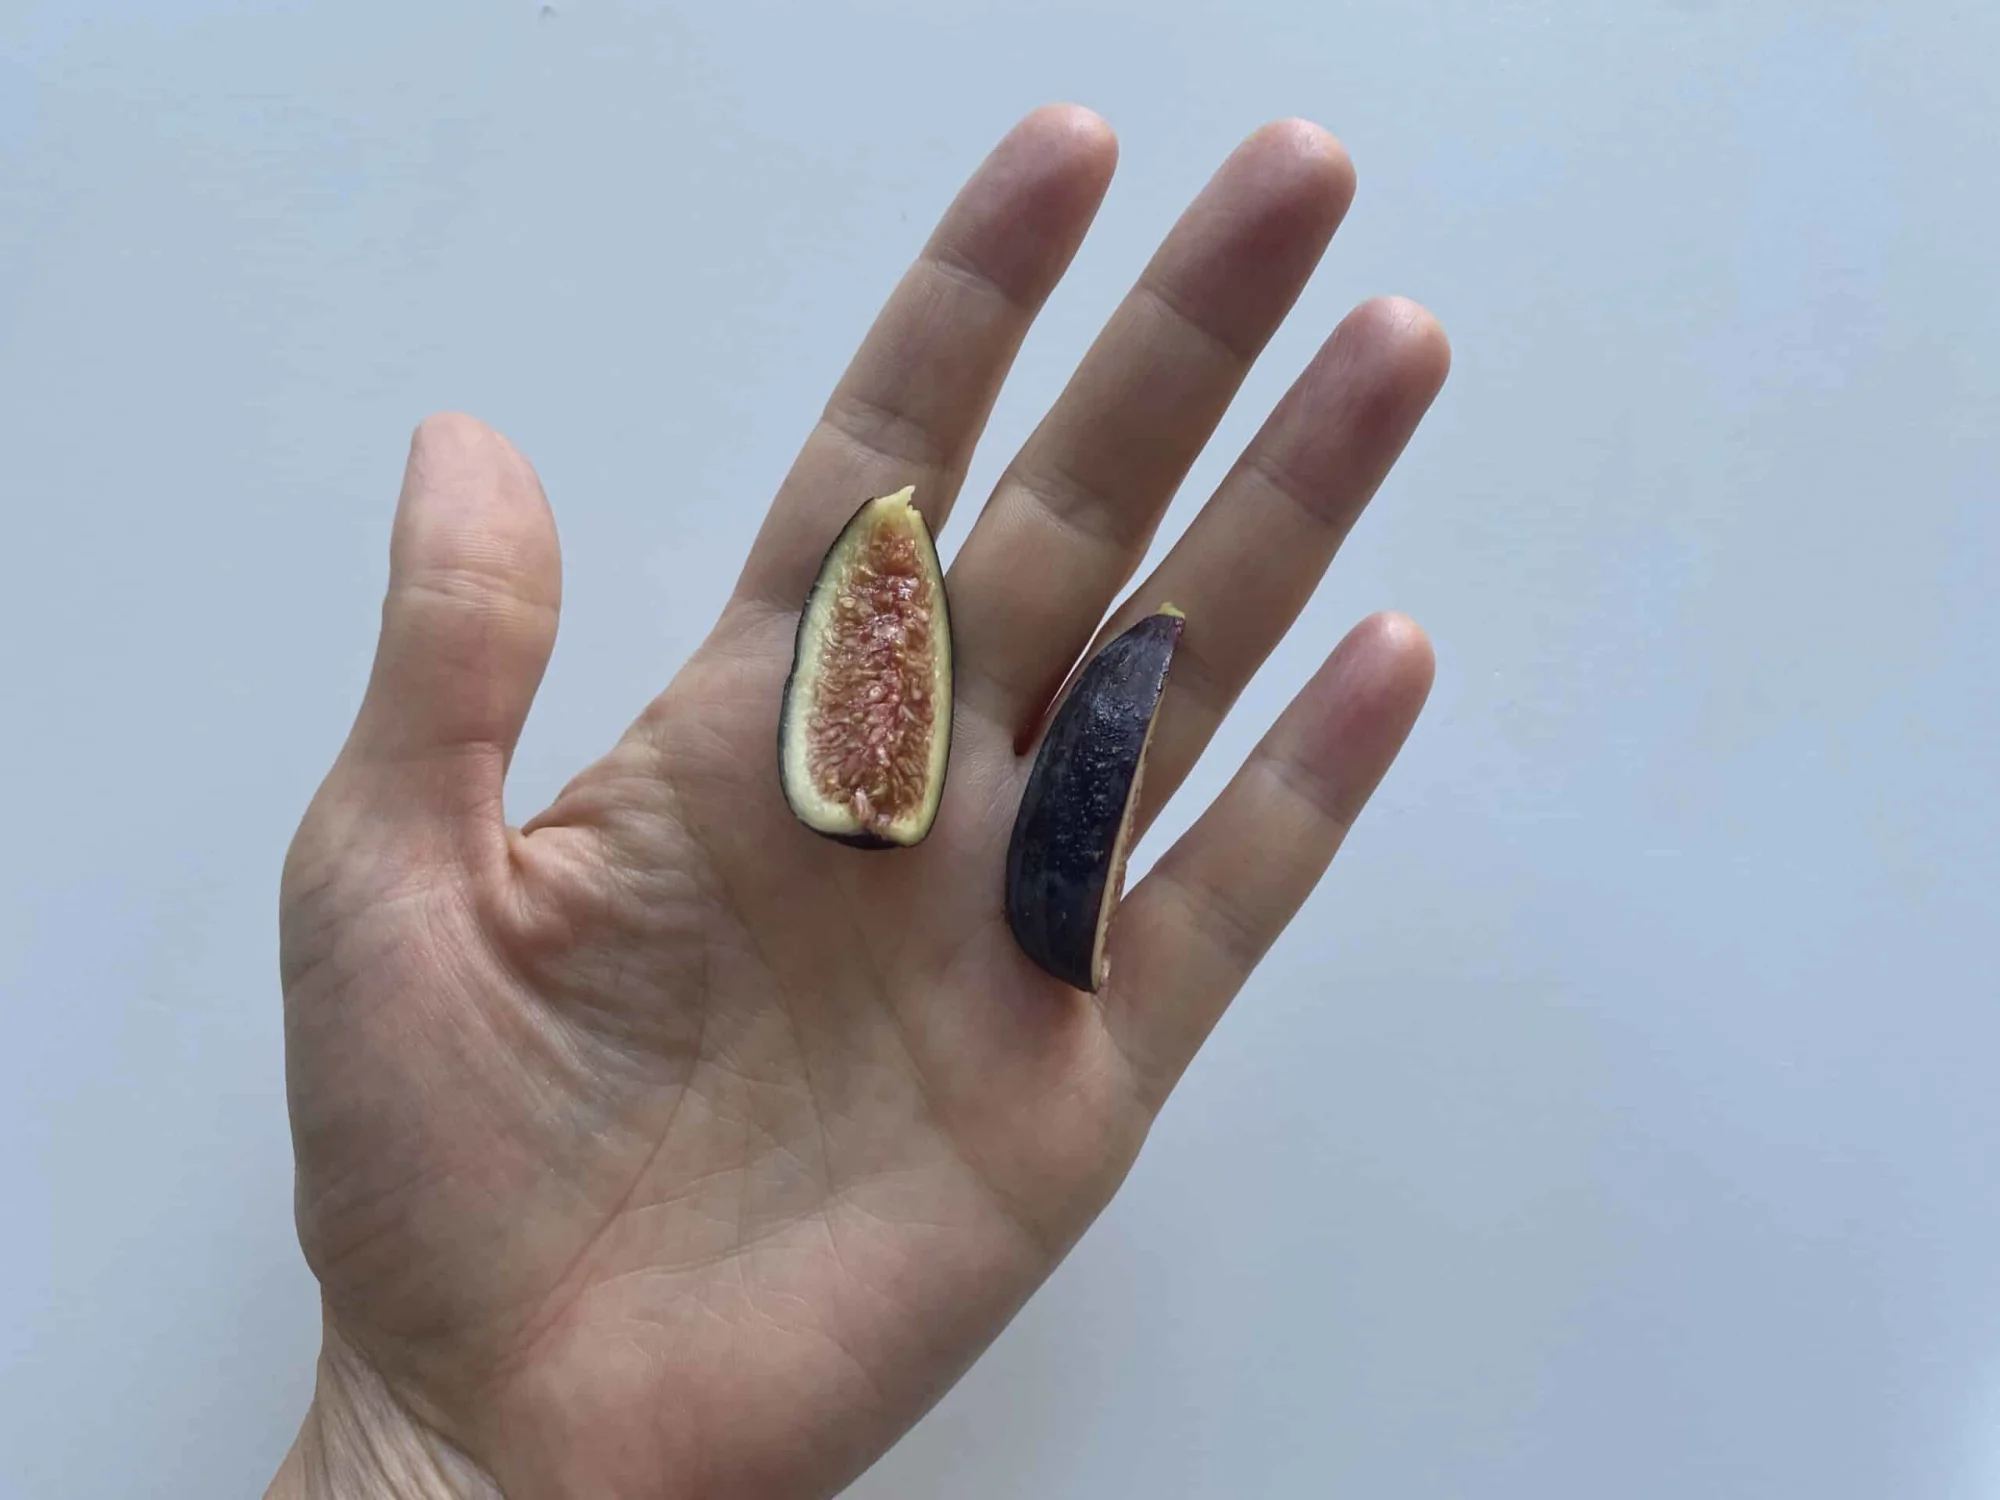 a hand holding two pieces of a fig that has been quartered lengthwise for babies 9 months+